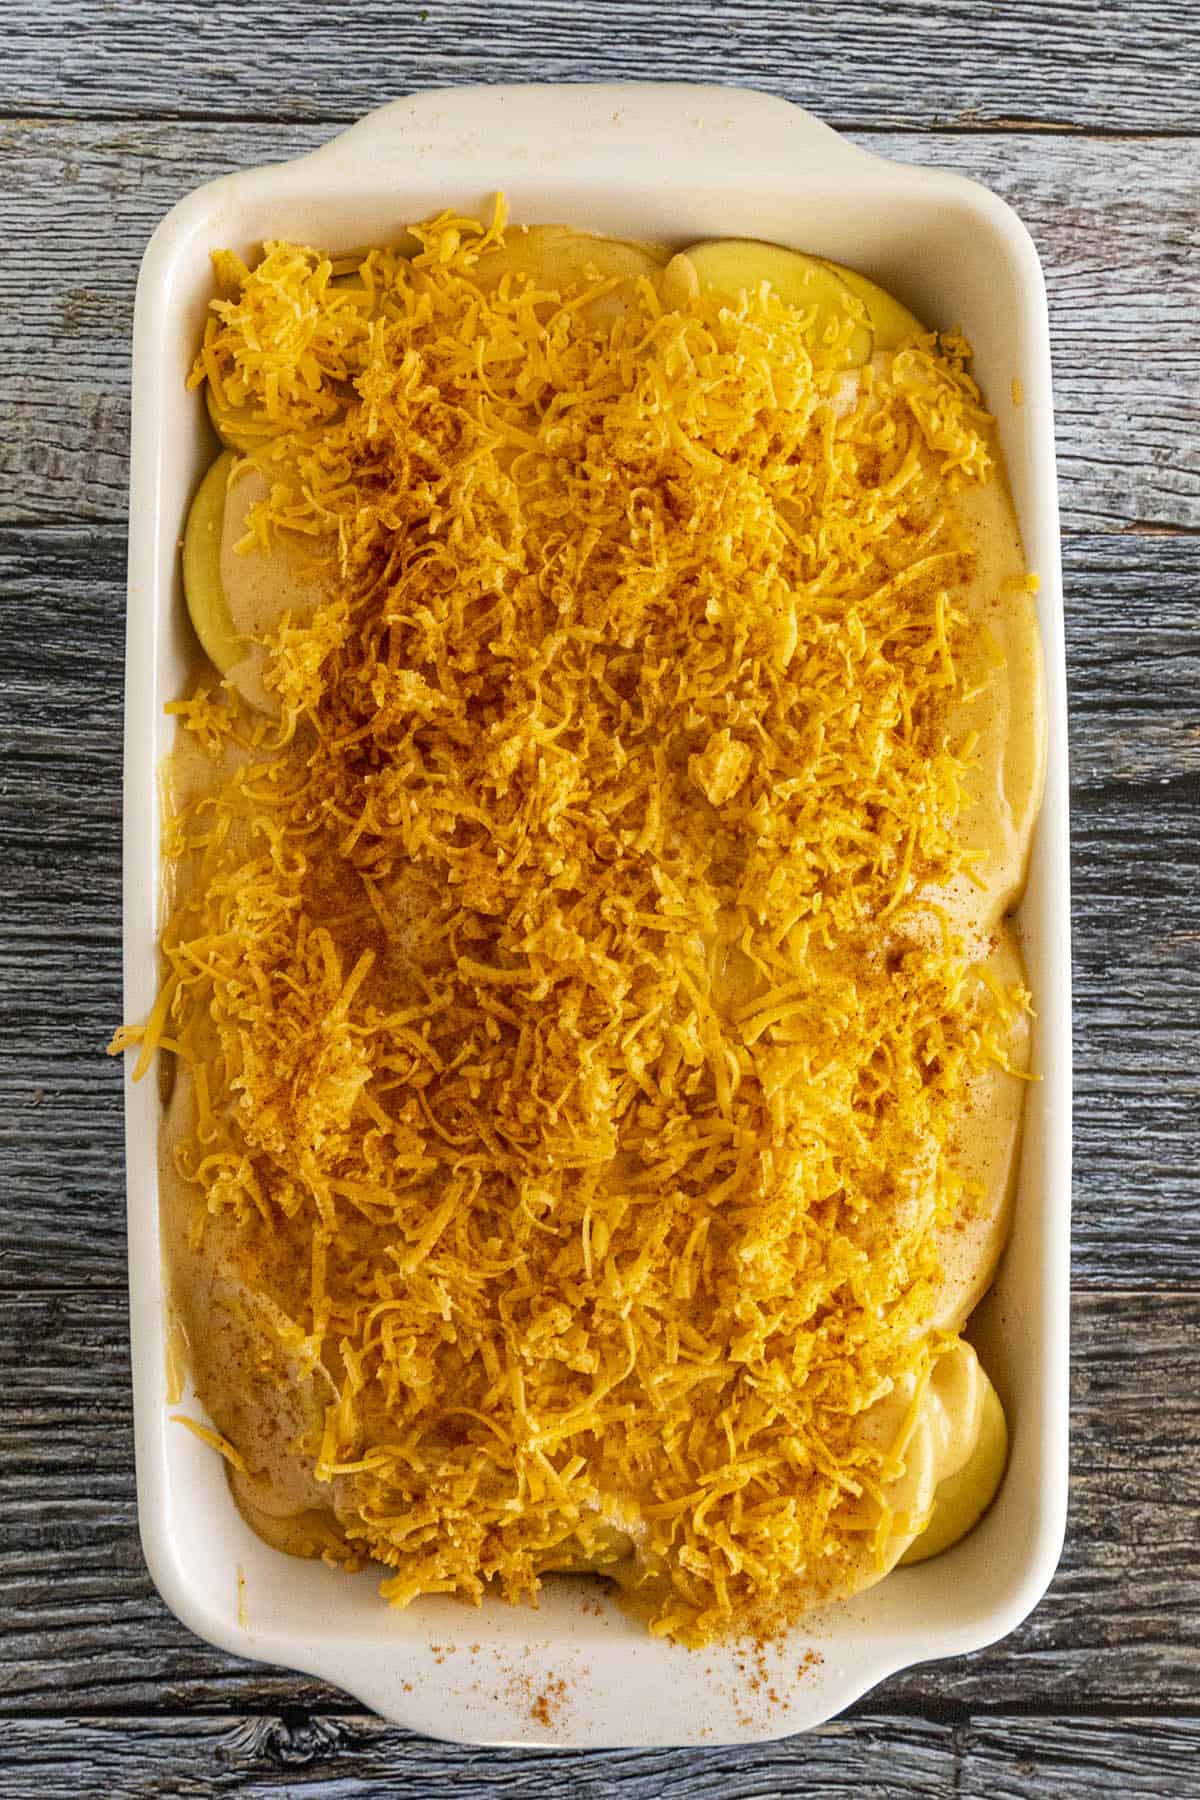 Scalloped Potatoes topped with shredded cheddar cheese, ready for the oven